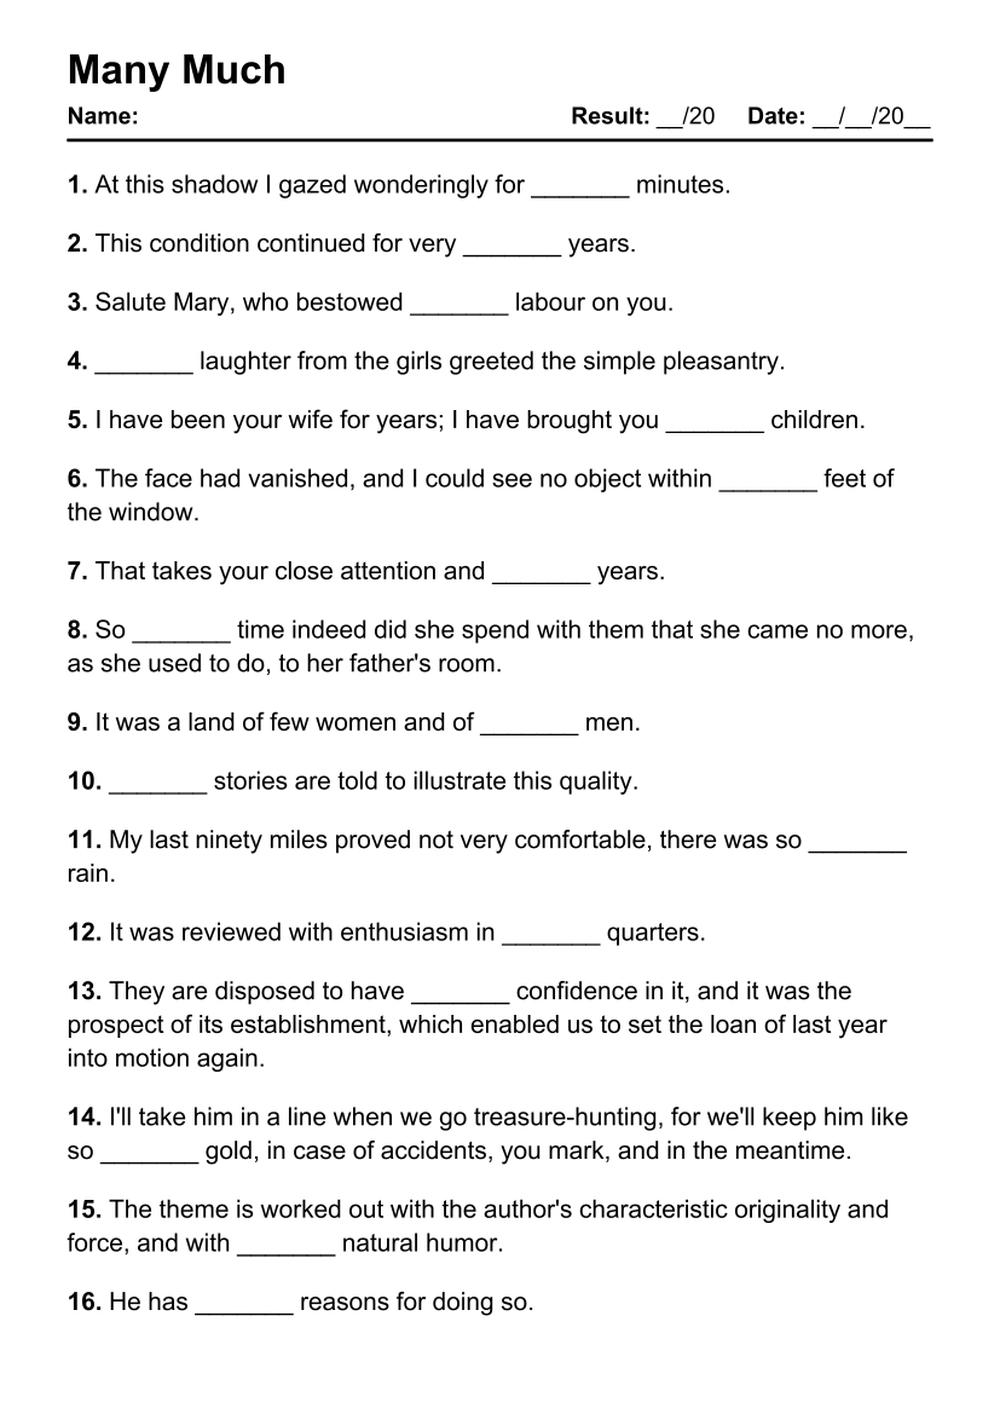 Printable Many Much Exercises - PDF Worksheet with Answers - Test 25